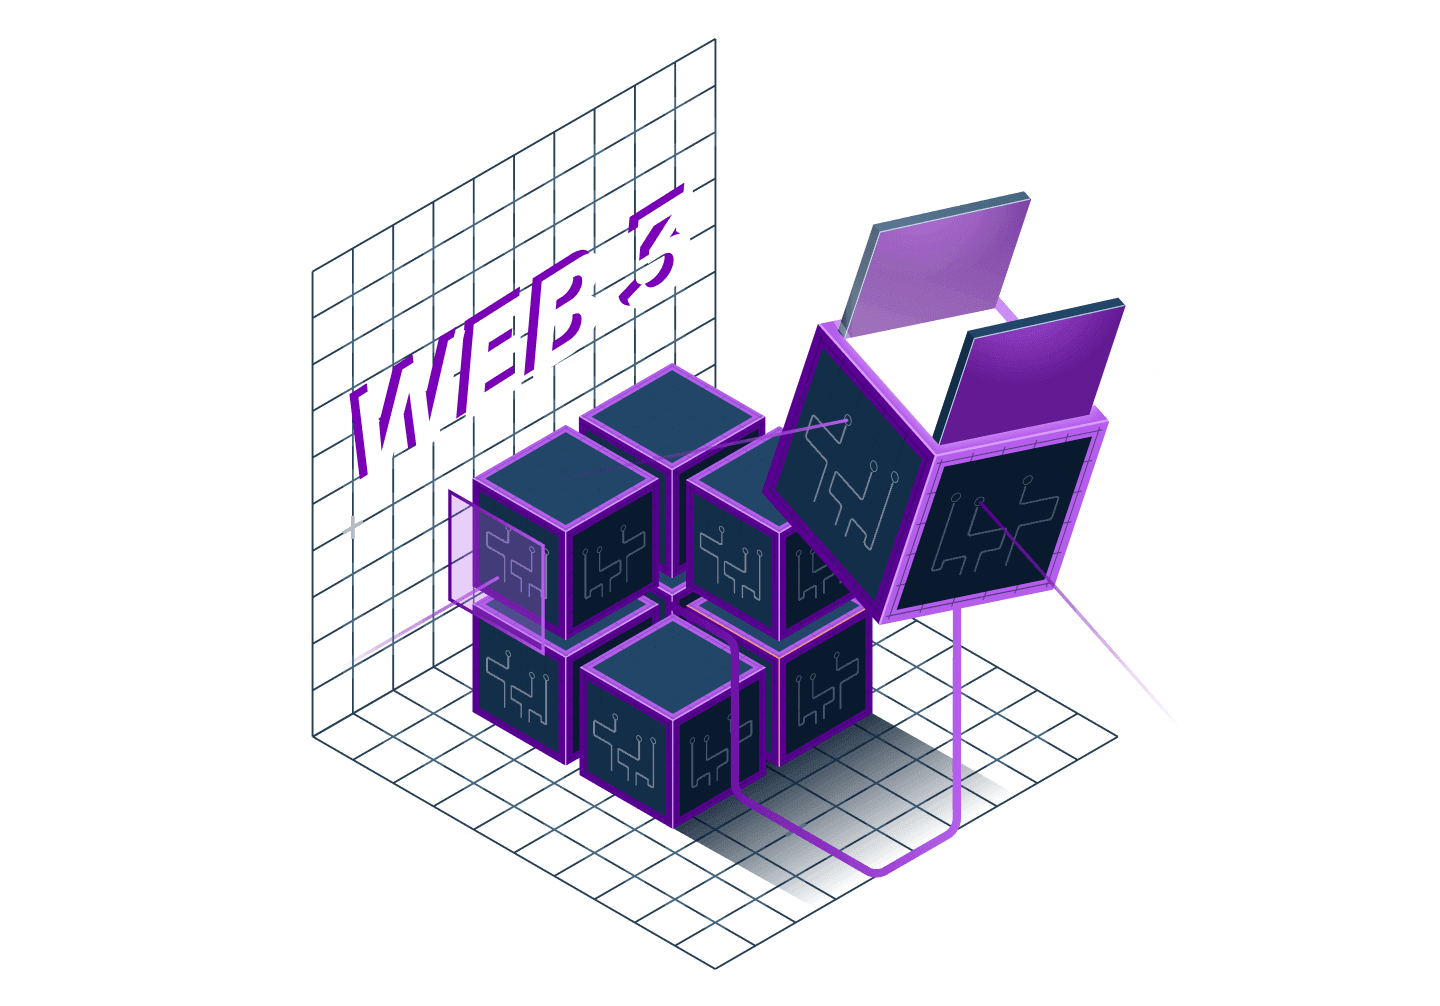 Why should we adopt Web3 technology